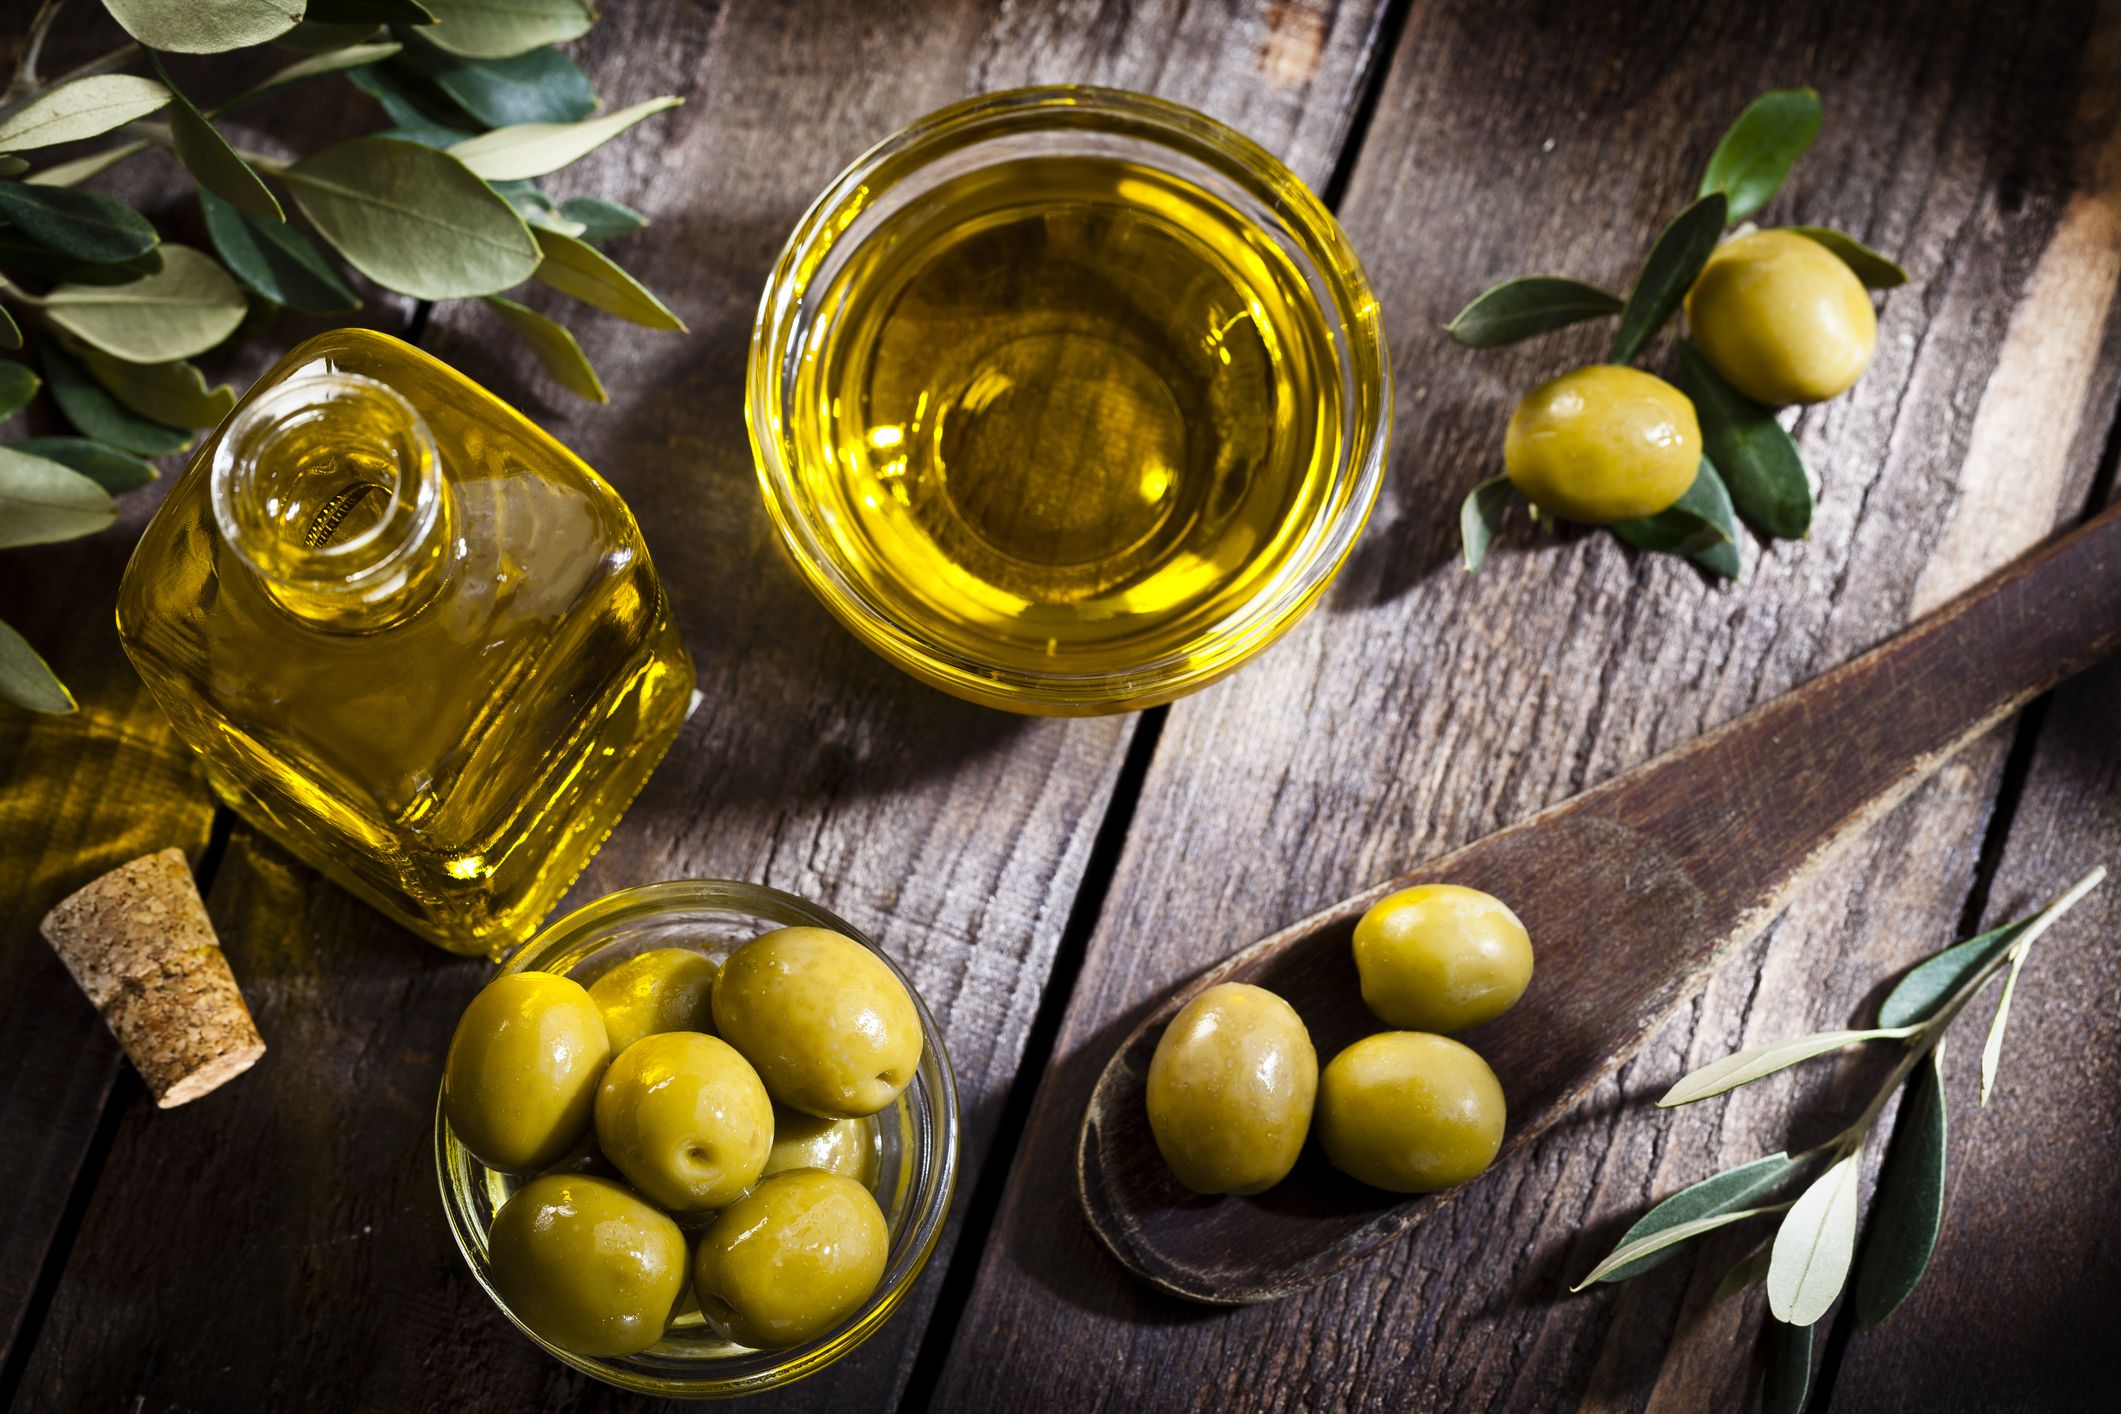 6 Proven Olive Oil Benefits - Natural Remedies Using Olive Oil